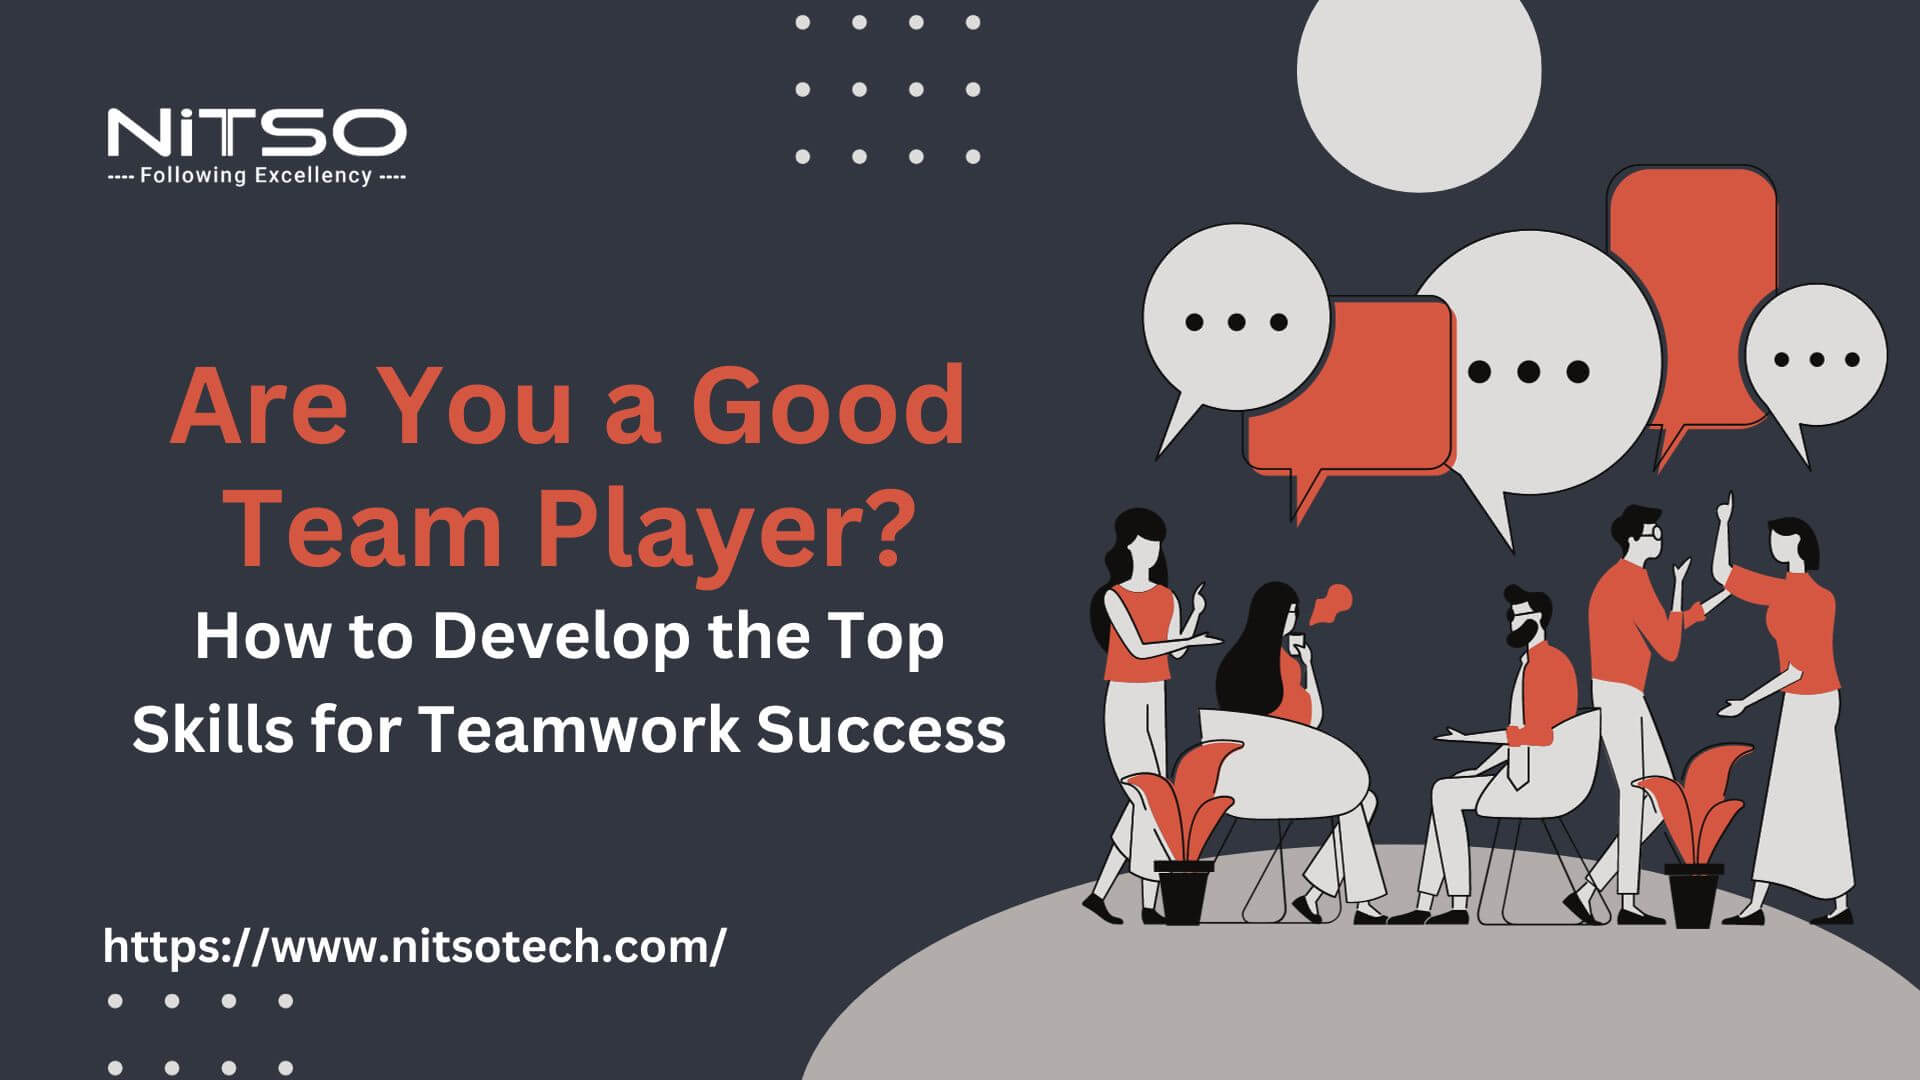 How to Show You’ll Be a Good Team Player When Joining a New Team